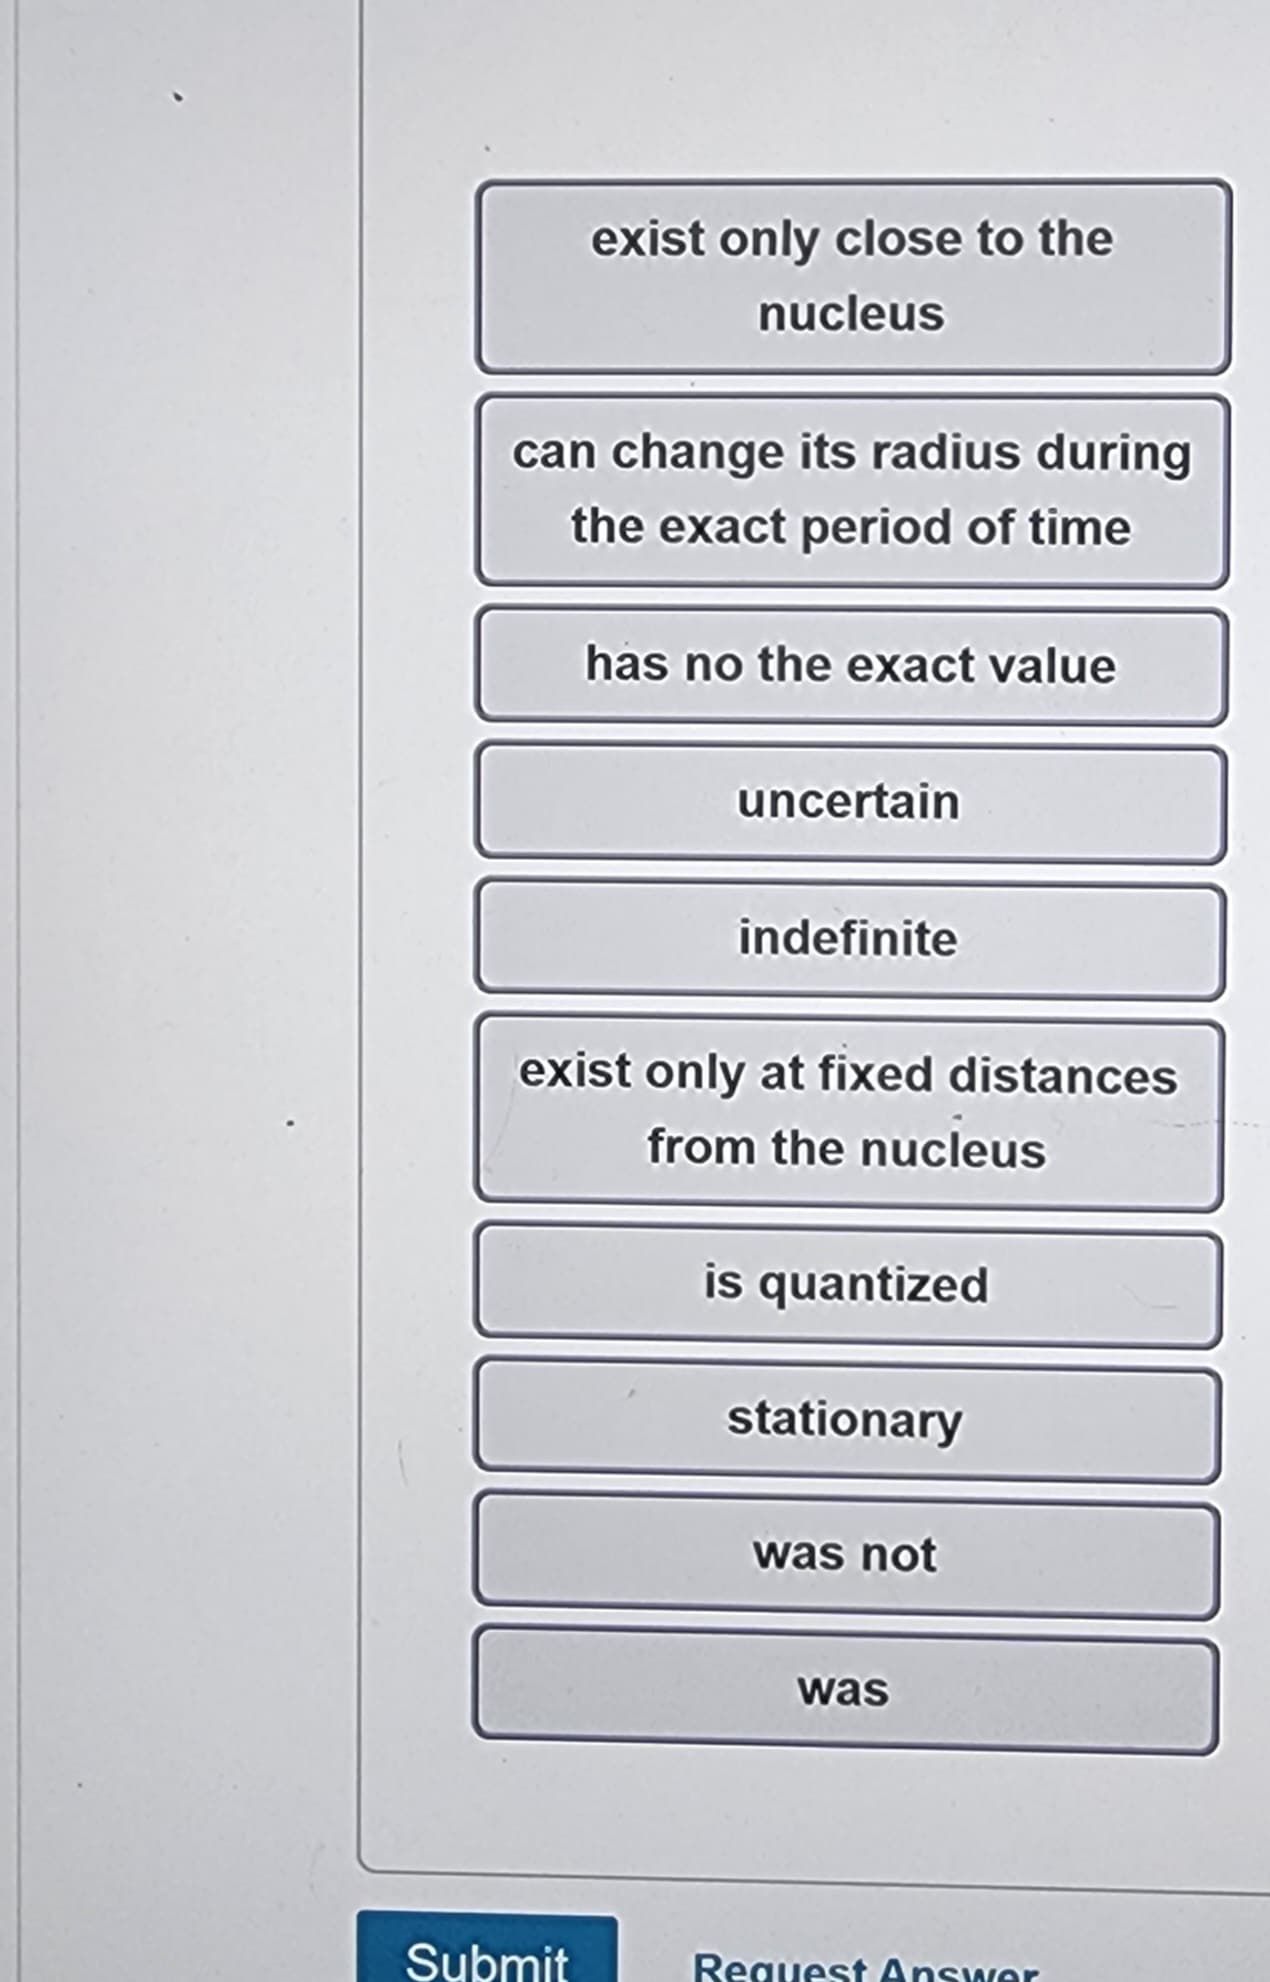 exist only close to the
nucleus
can change its radius during
the exact period of time
Submit
has no the exact value
uncertain
indefinite
exist only at fixed distances
from the nucleus
is quantized
stationary
was not
was
Request Answer
C
-
-
8000 2800